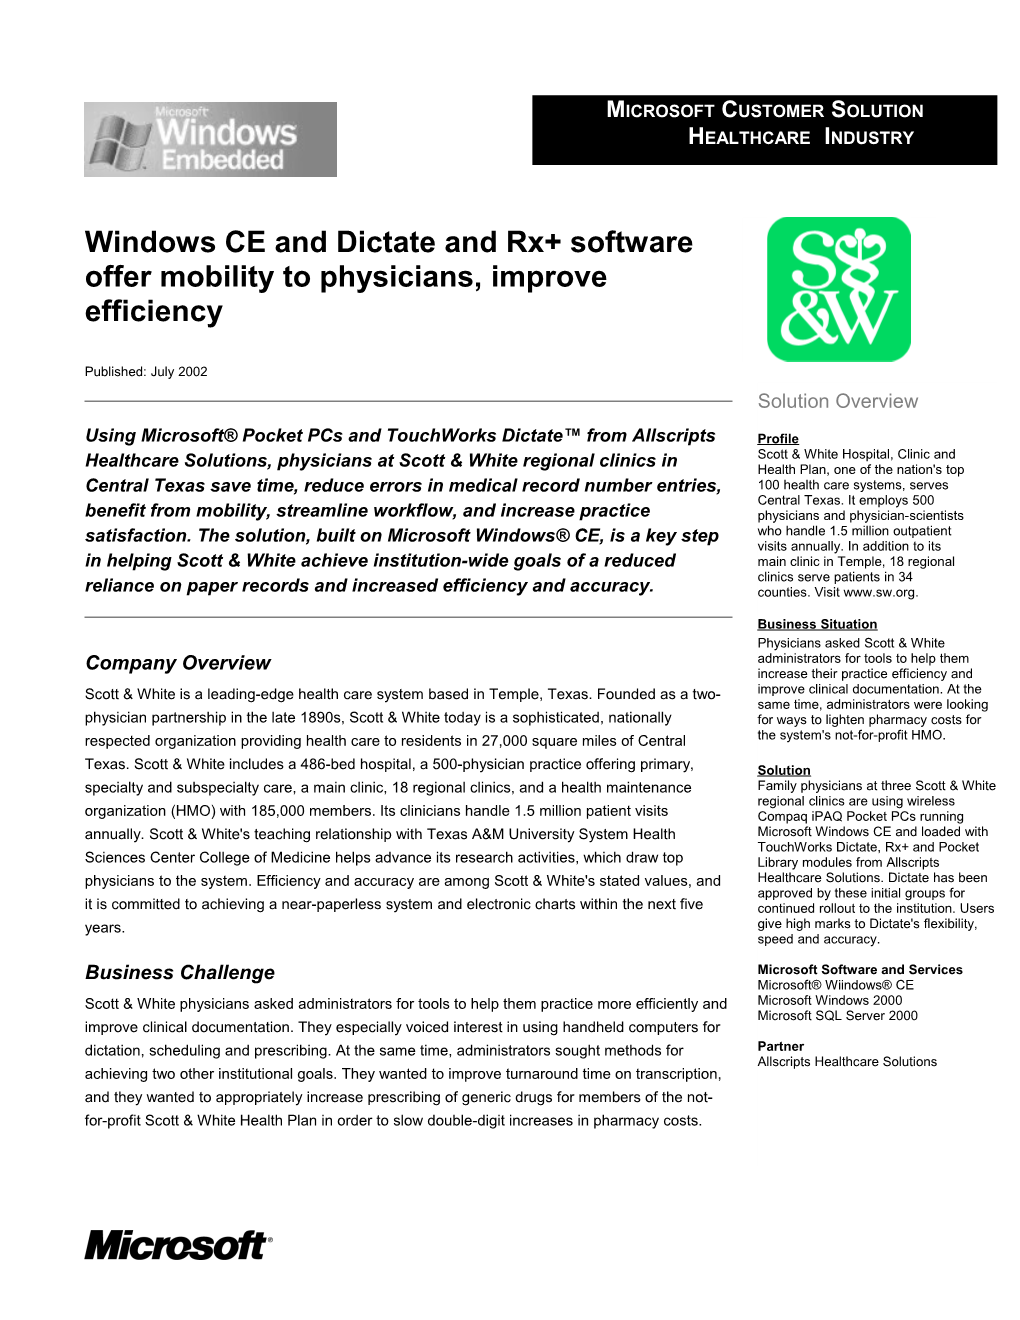 Windows CE and Dictate and Rx+ Software Offer Mobility to Physicians, Improve Efficiency